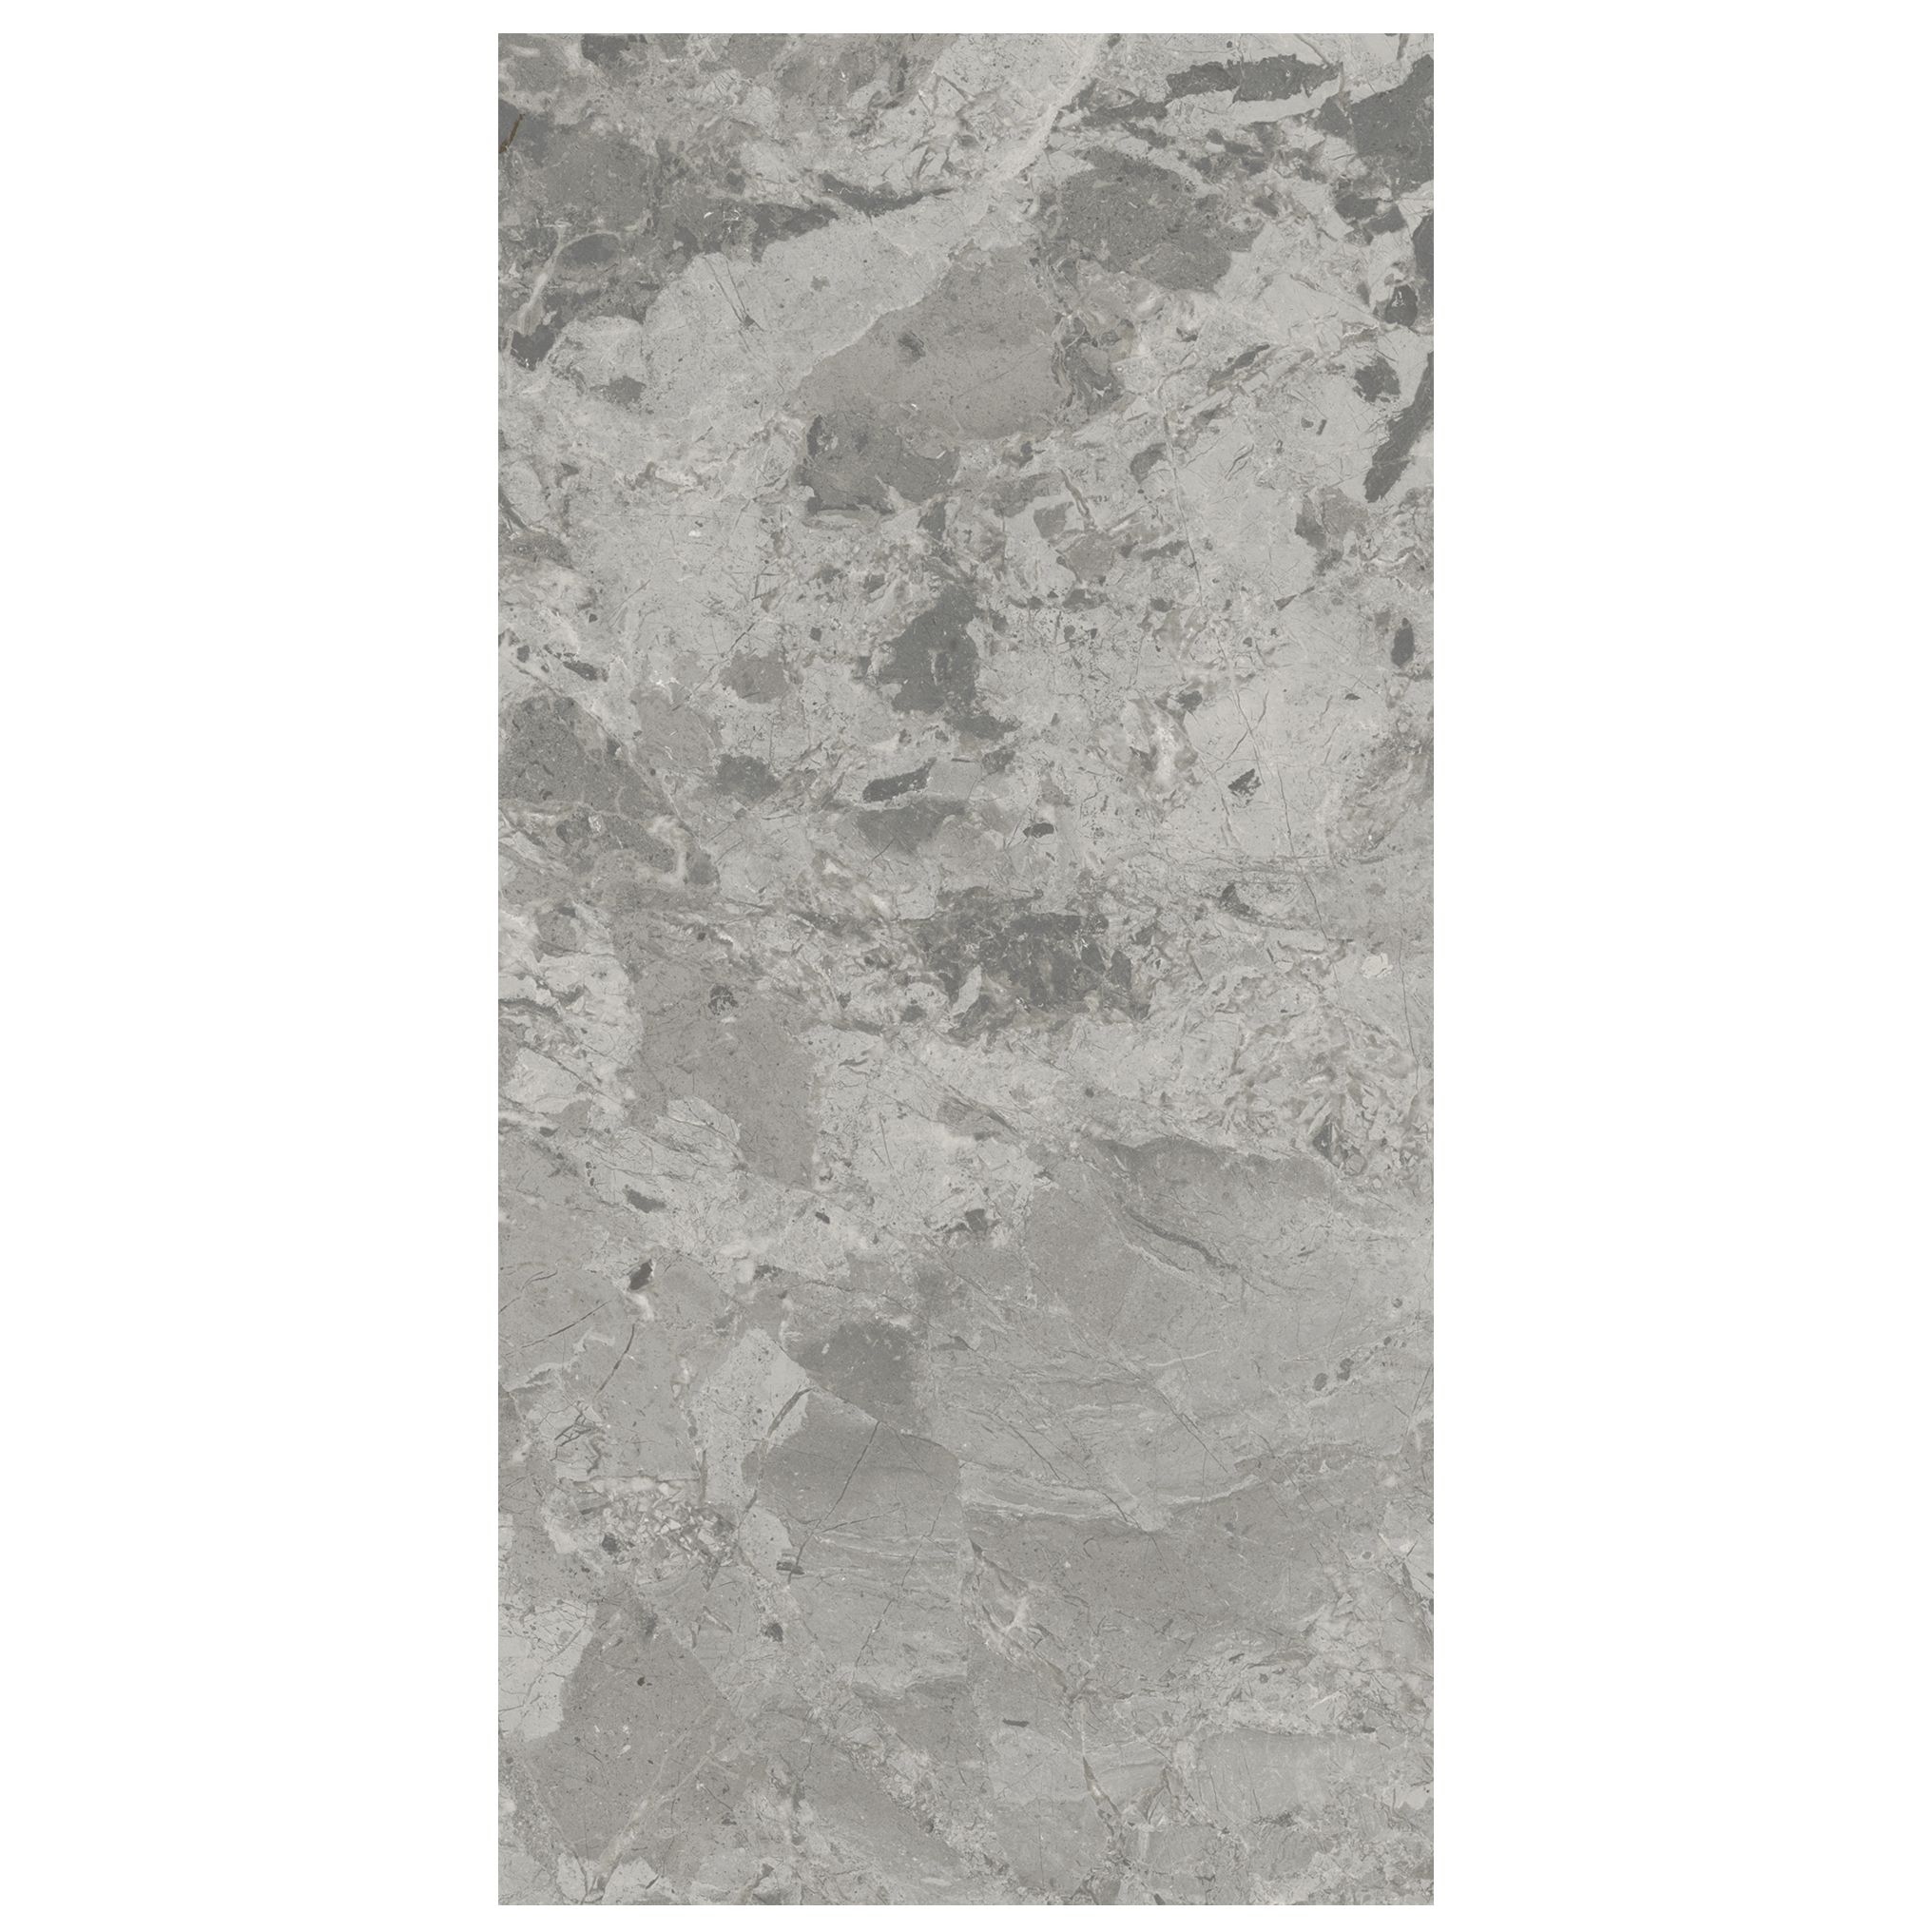 Harmony Grey Gloss Marble effect Ceramic Wall Tile, Pack of 8, (L)500mm (W)250mm